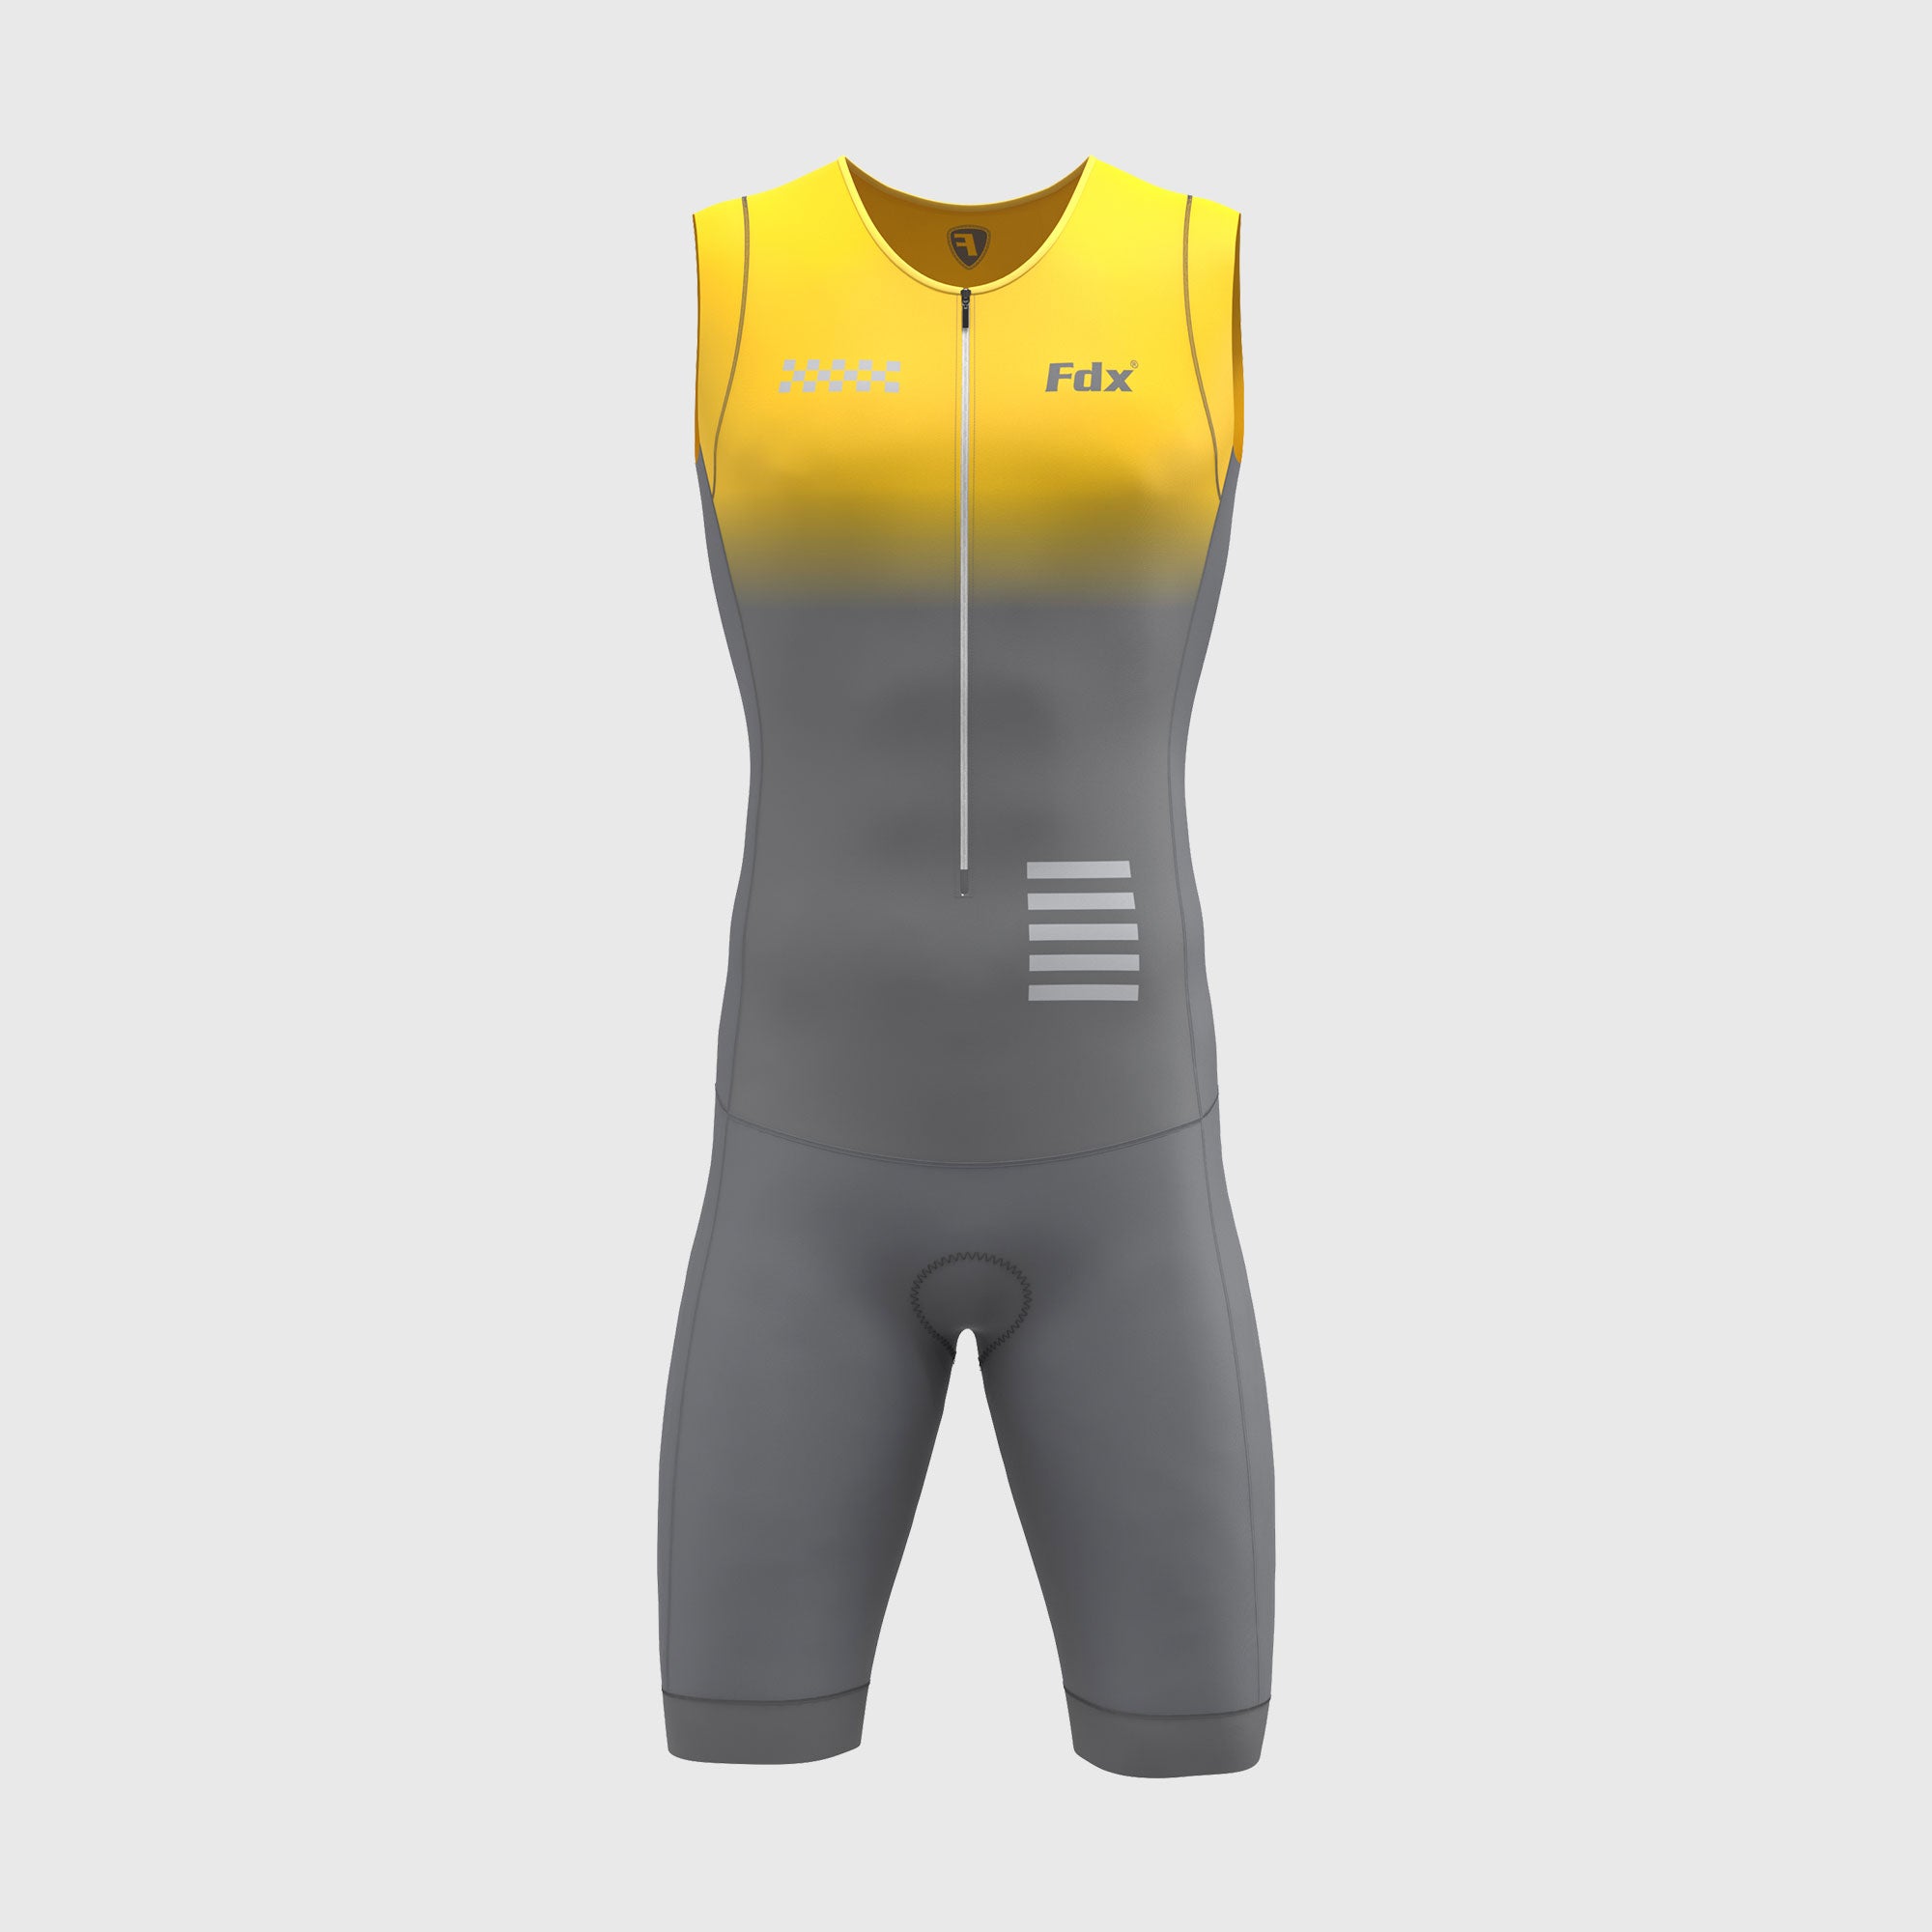 FDX Men’s Yellow & Gray Triathlon Suit, 3D Padded Breathable Compression Cycling Tri suit with Sleeveless One Piece Skinsuit for Racing, Training, Running